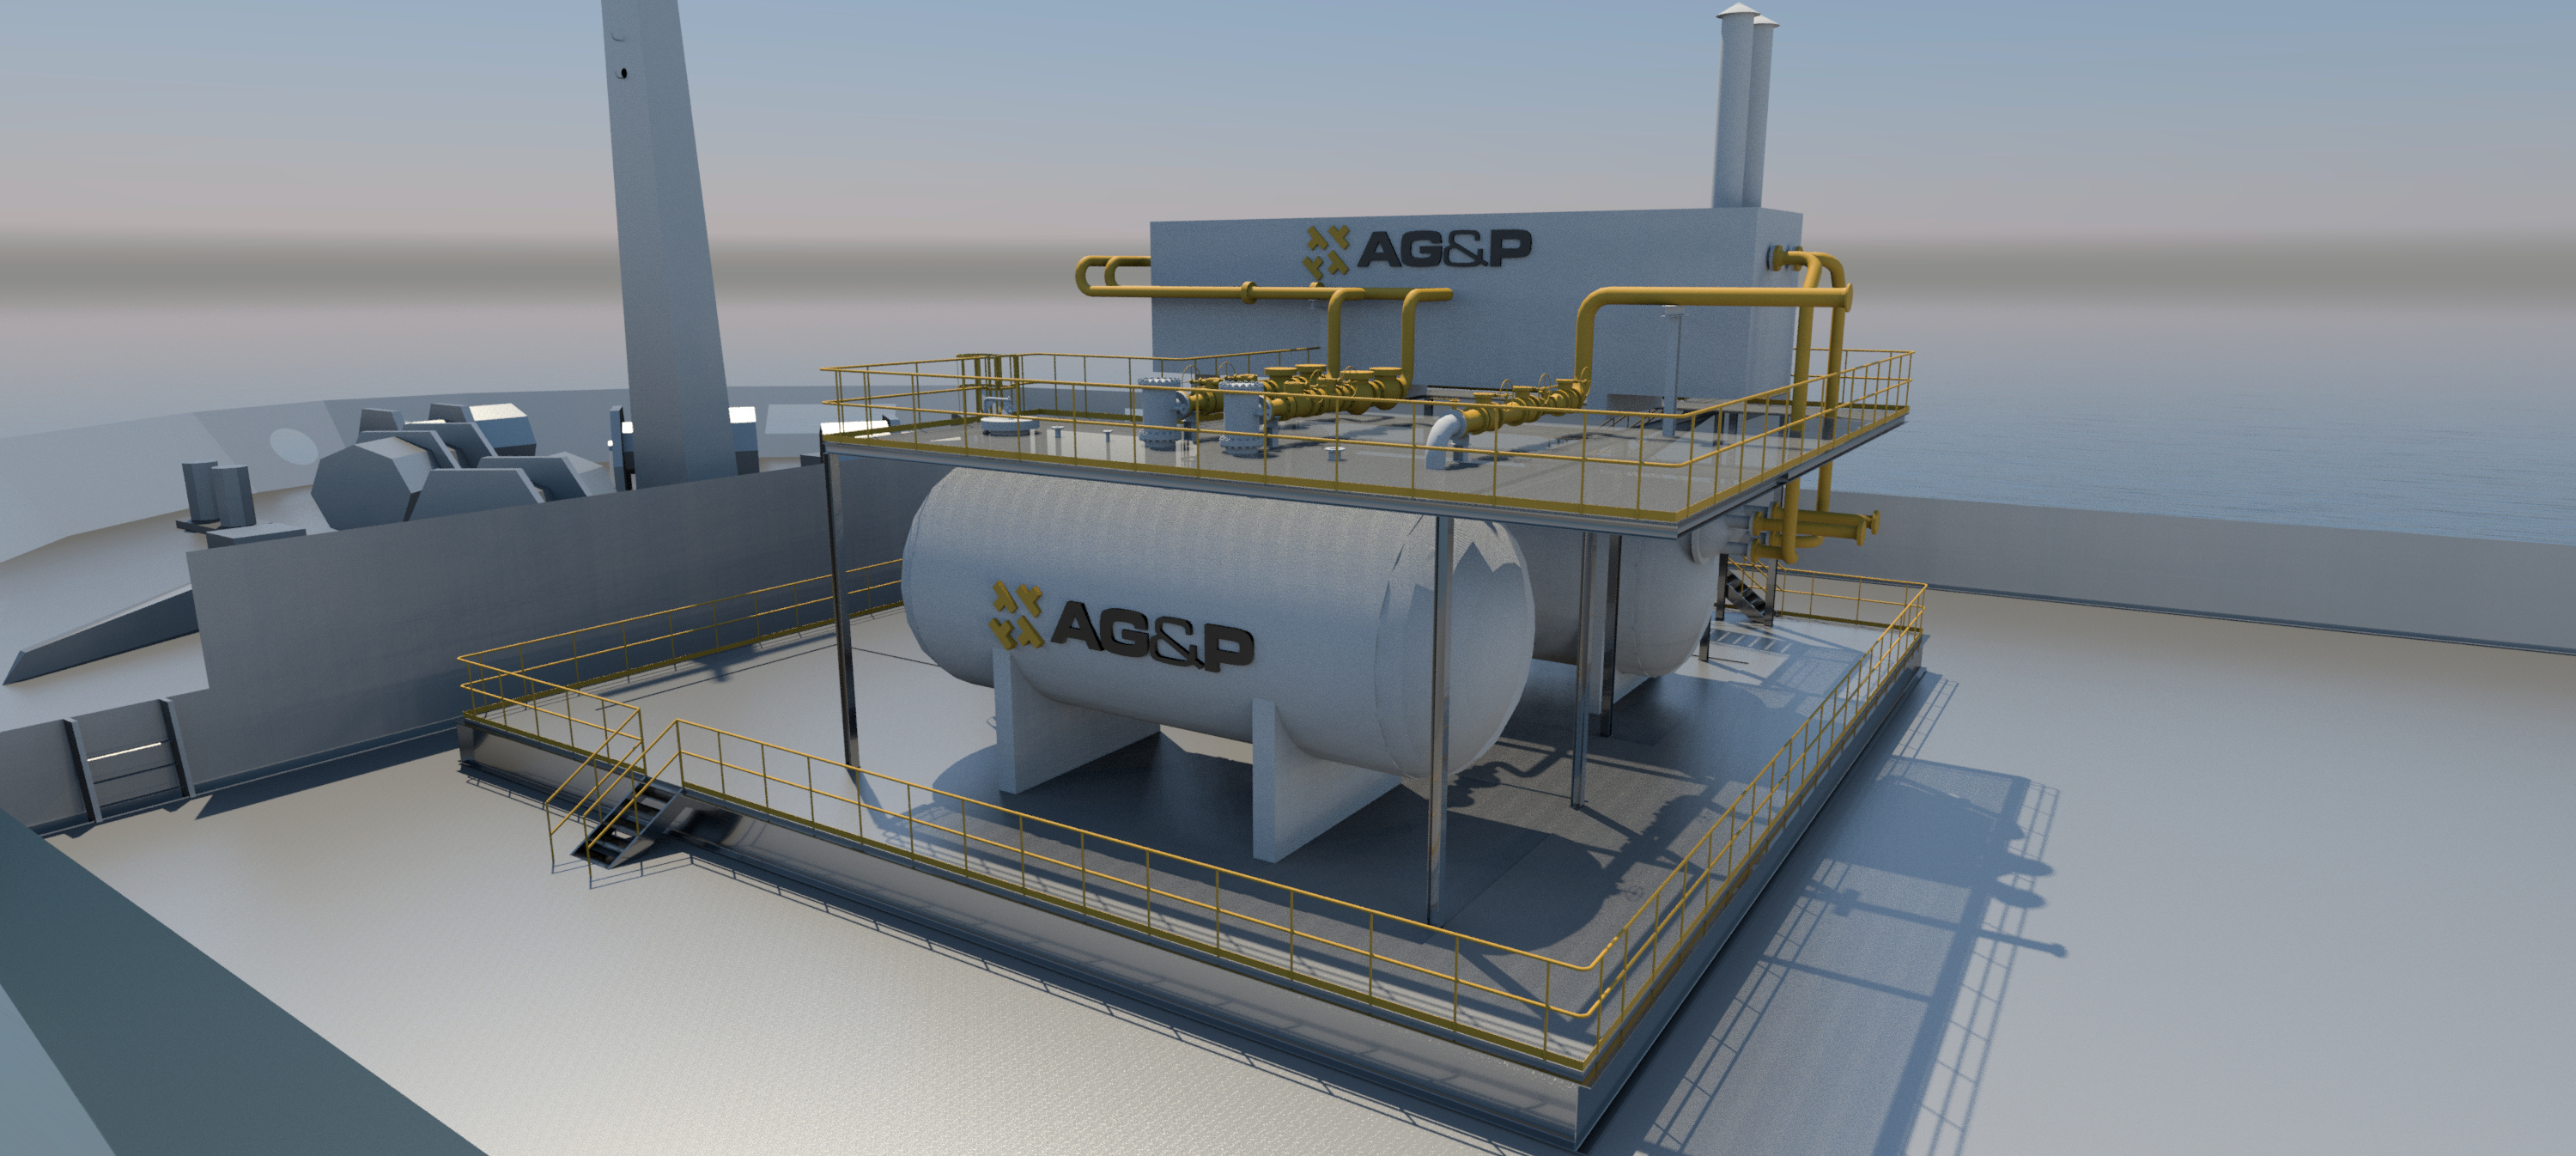 AG&P expands its LNG terminal solutions